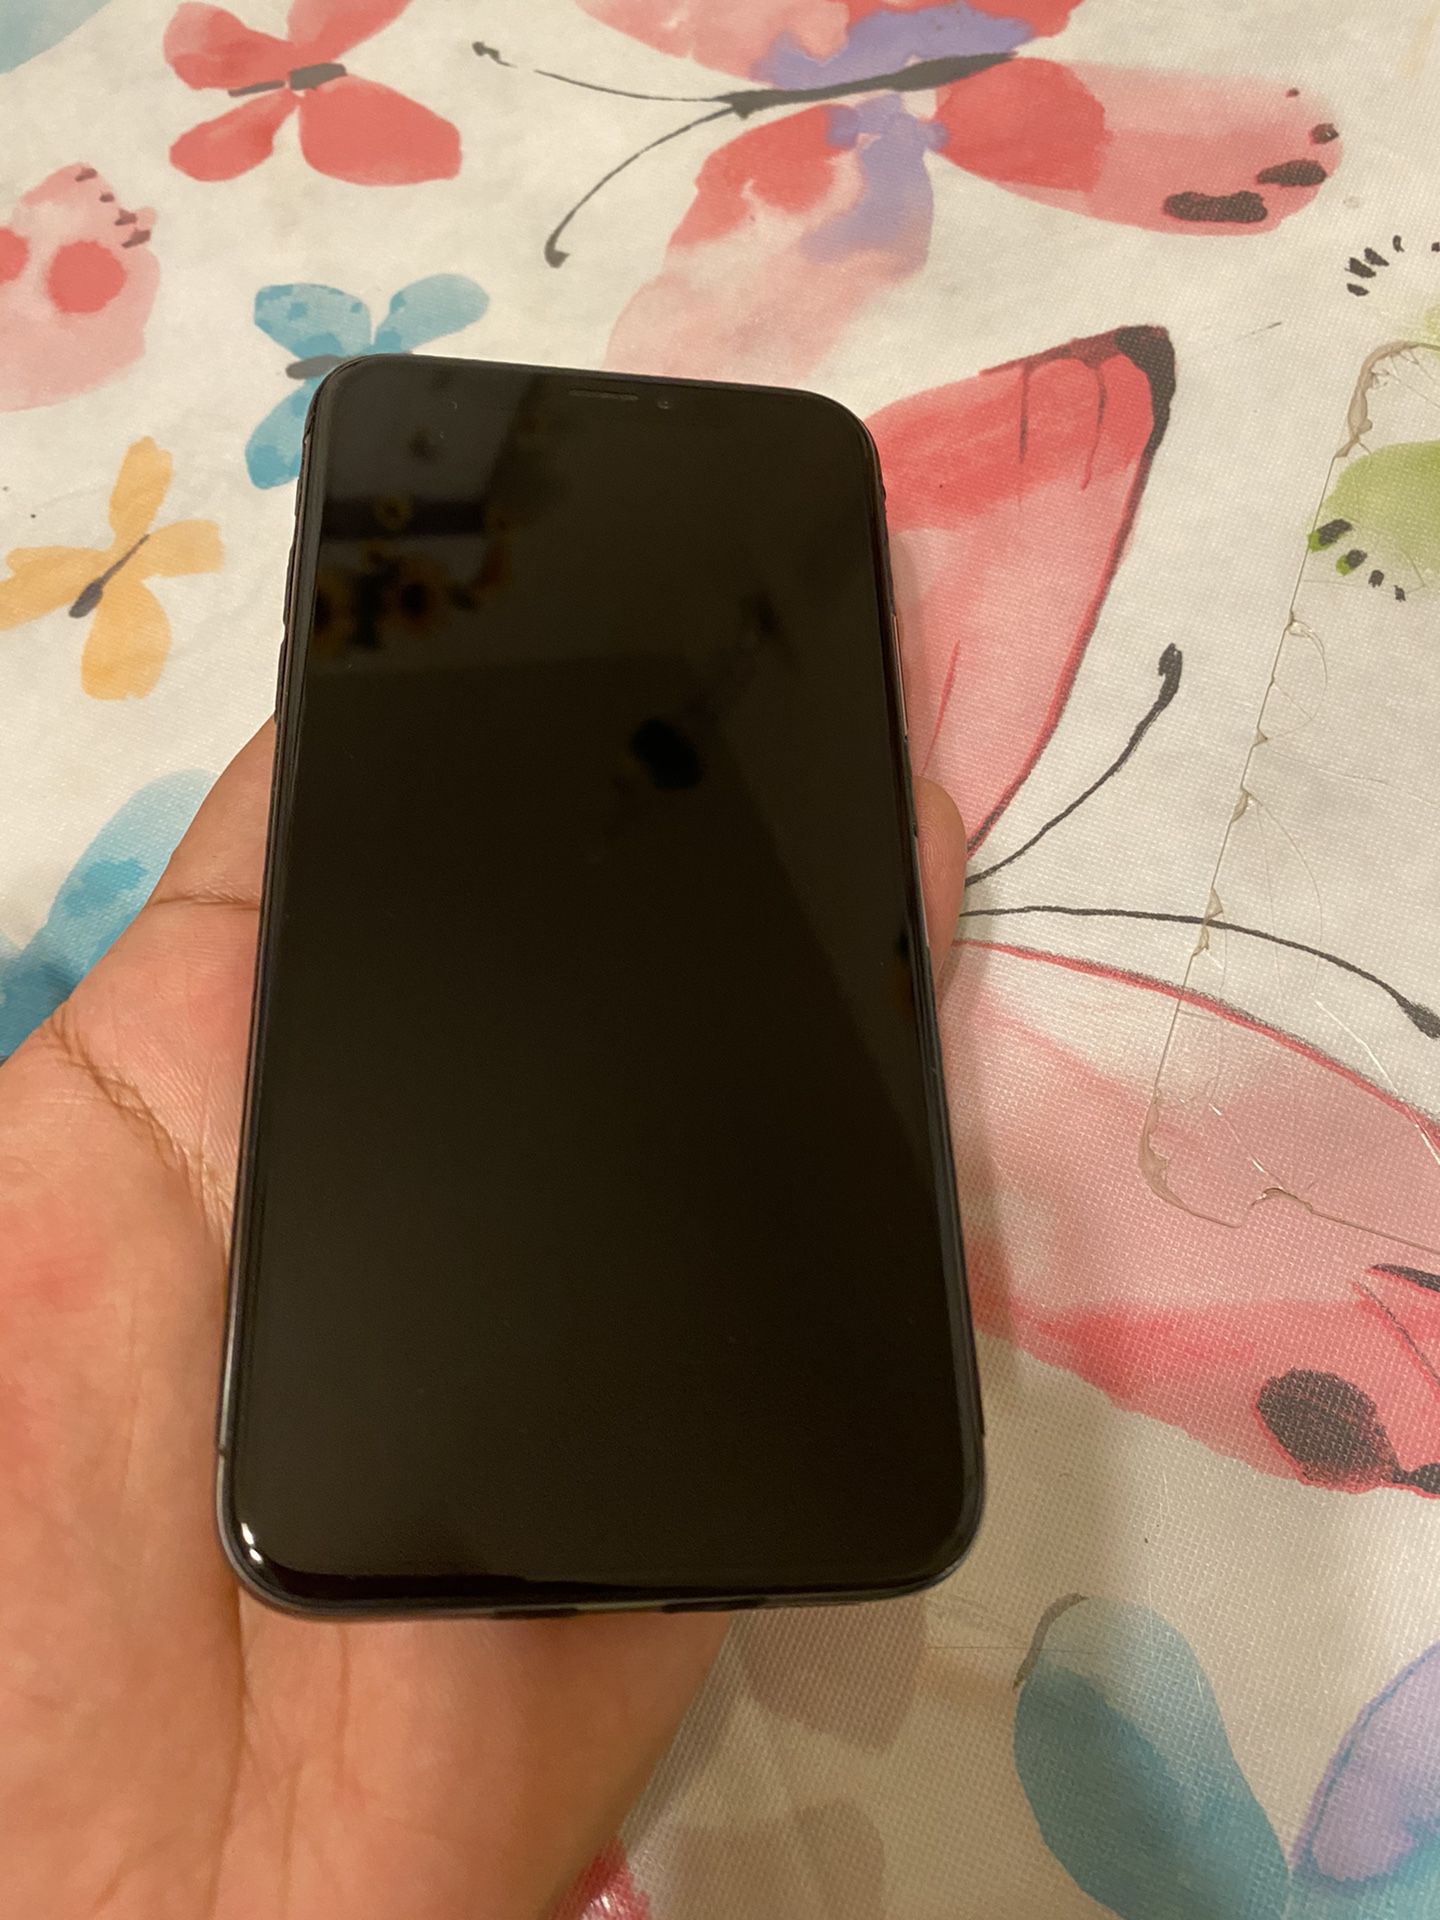 IPHONE X 64GB T-MOBILE UNLOCKED (cracked)